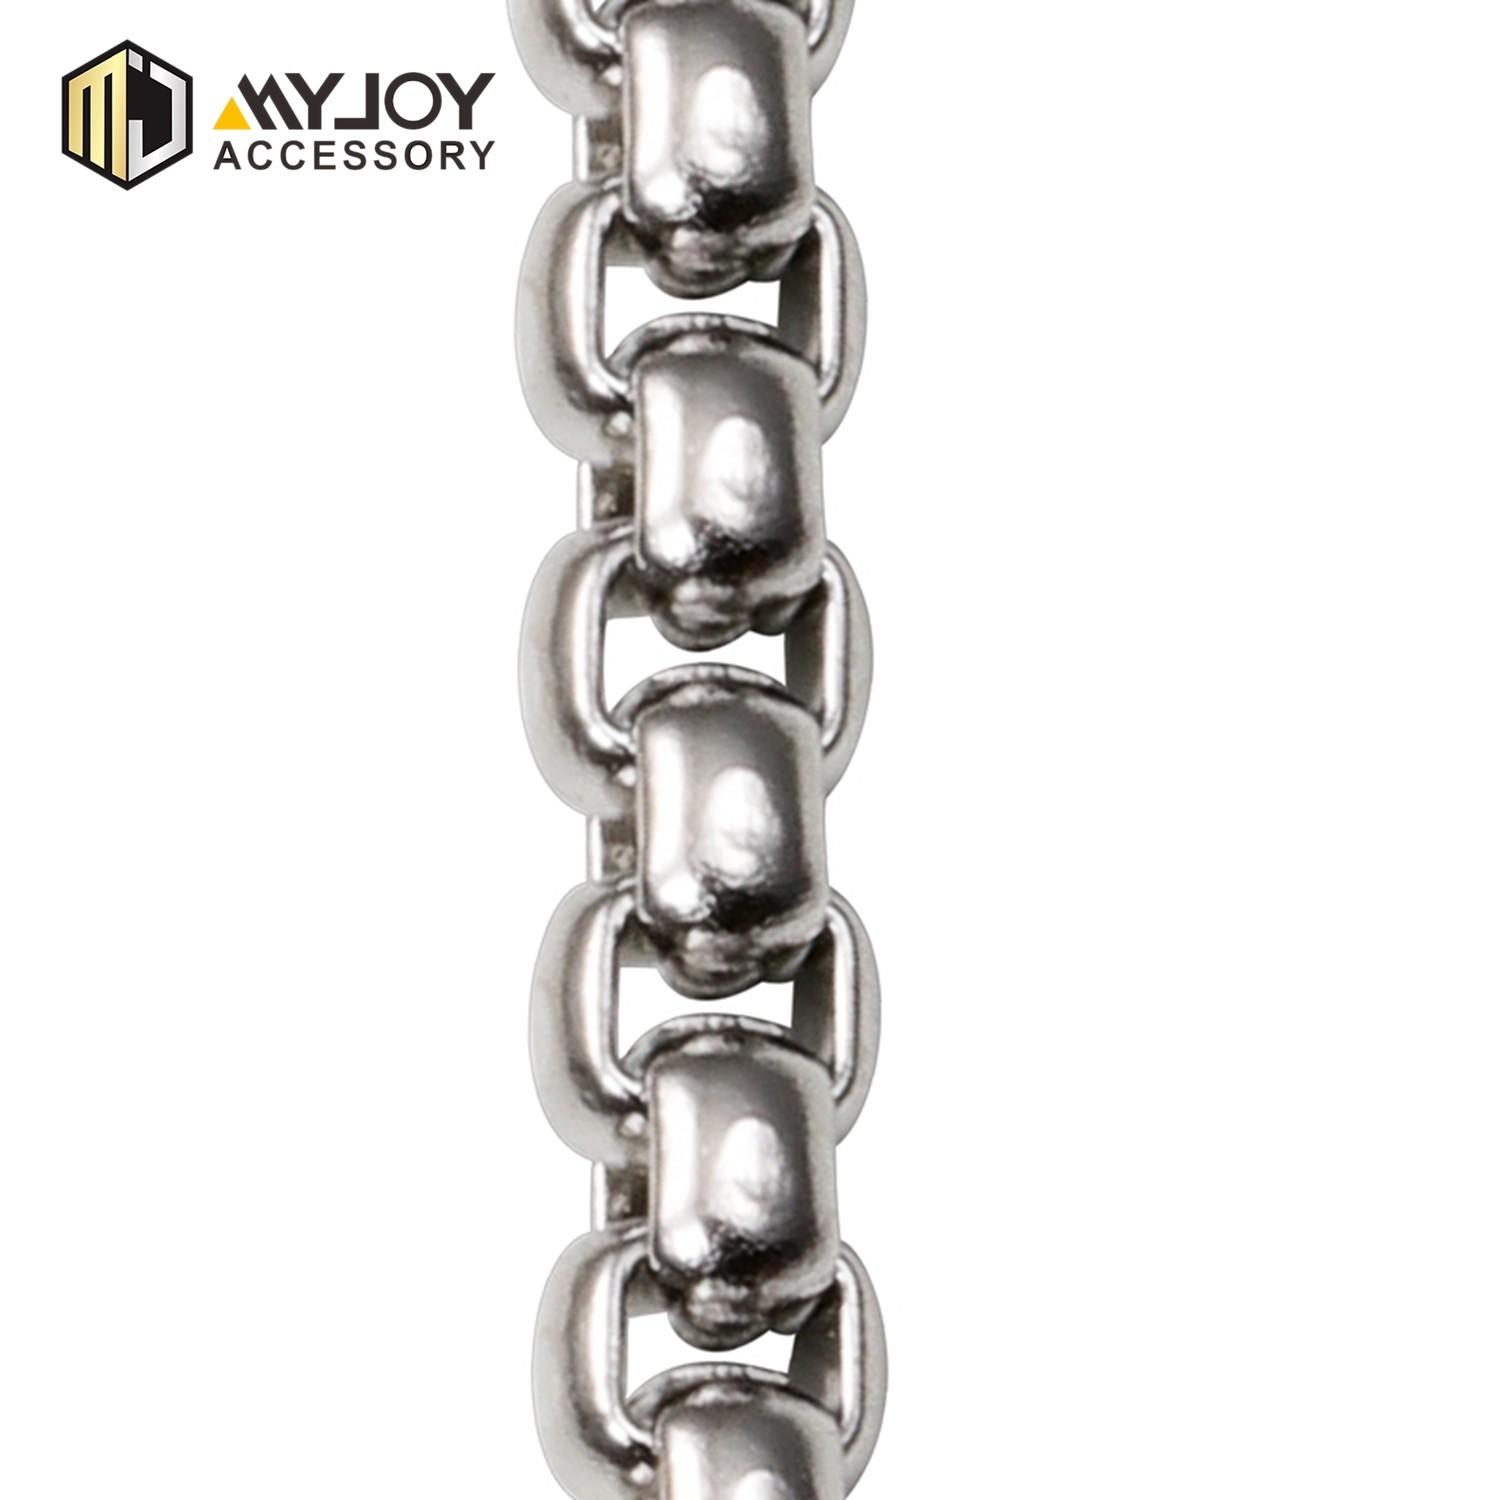 MYJOY High-quality strap chain Supply for purses